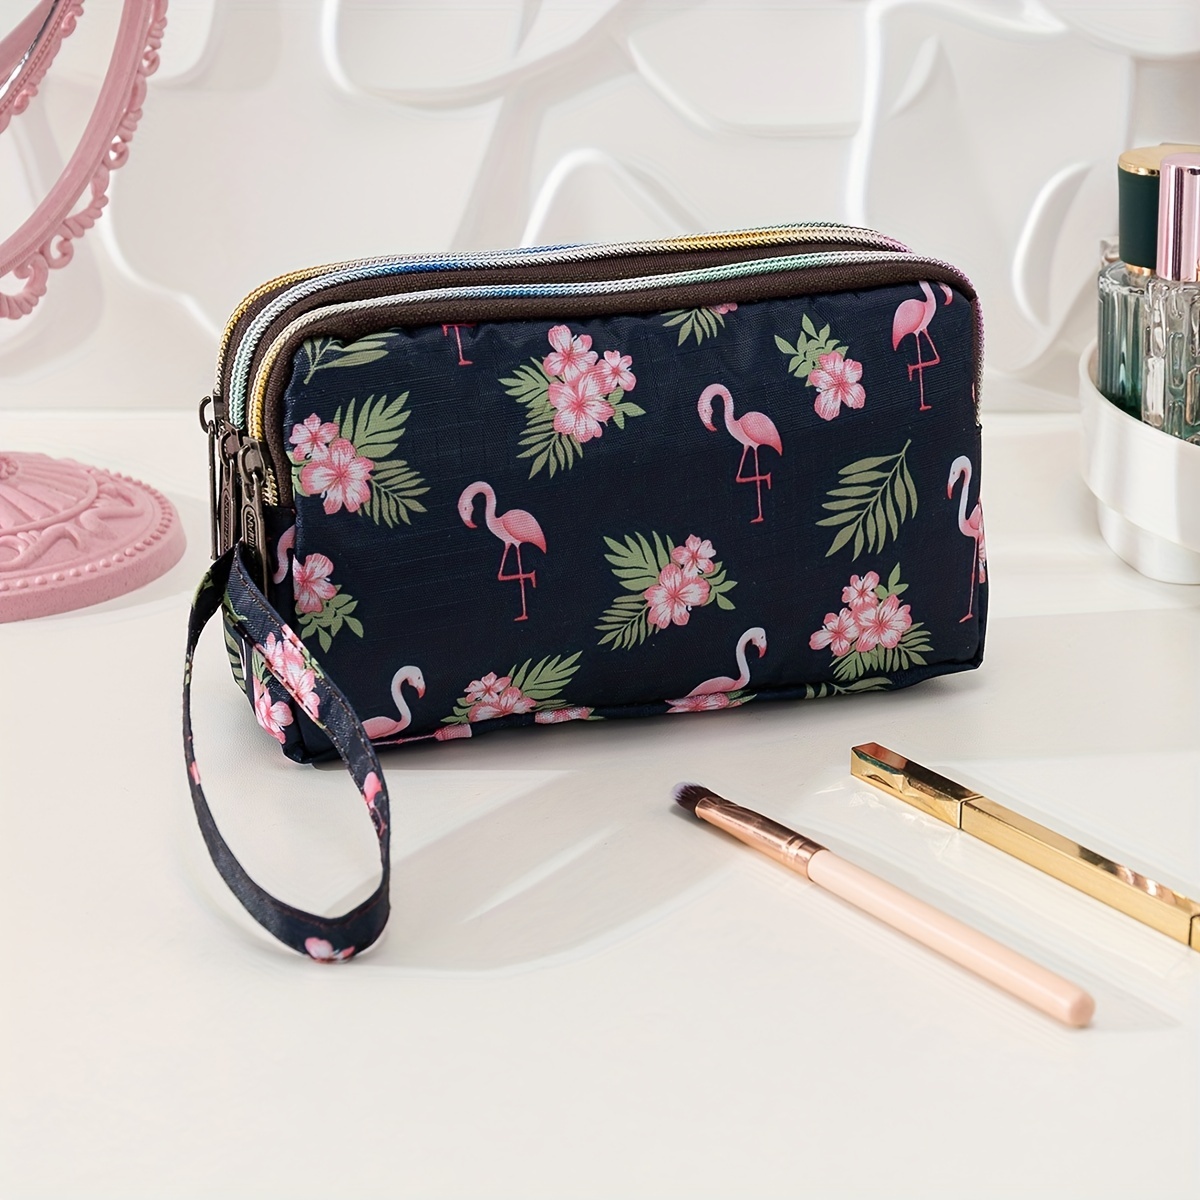 

Tropical & Flamingo Print Long Wallet With 3 Zippers Roomy Elegant Makeup Pouch Bag Travel Portable Cosmetic Accessories Organizer For Ladies And Women Gift